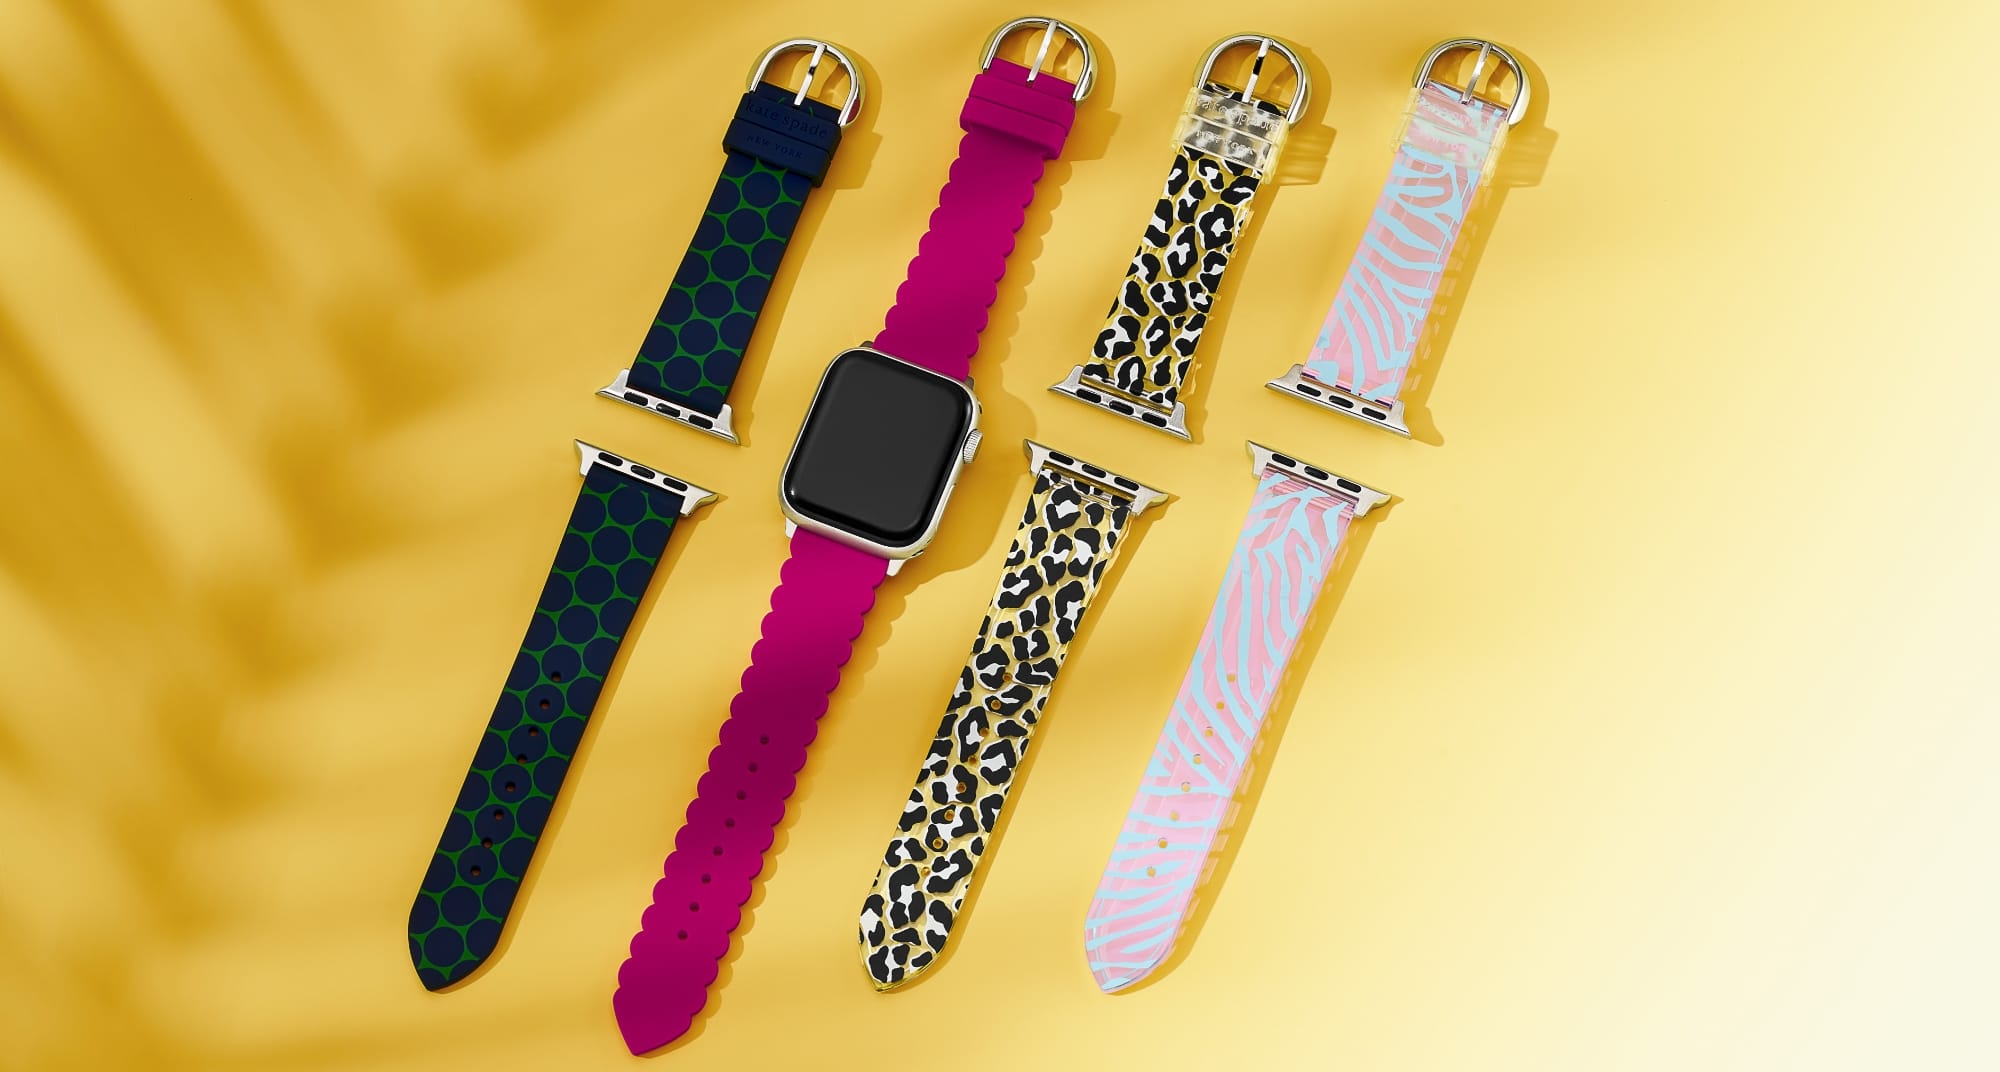 SHOP NEW SMARTWATCHES AND ACCCESSORIES